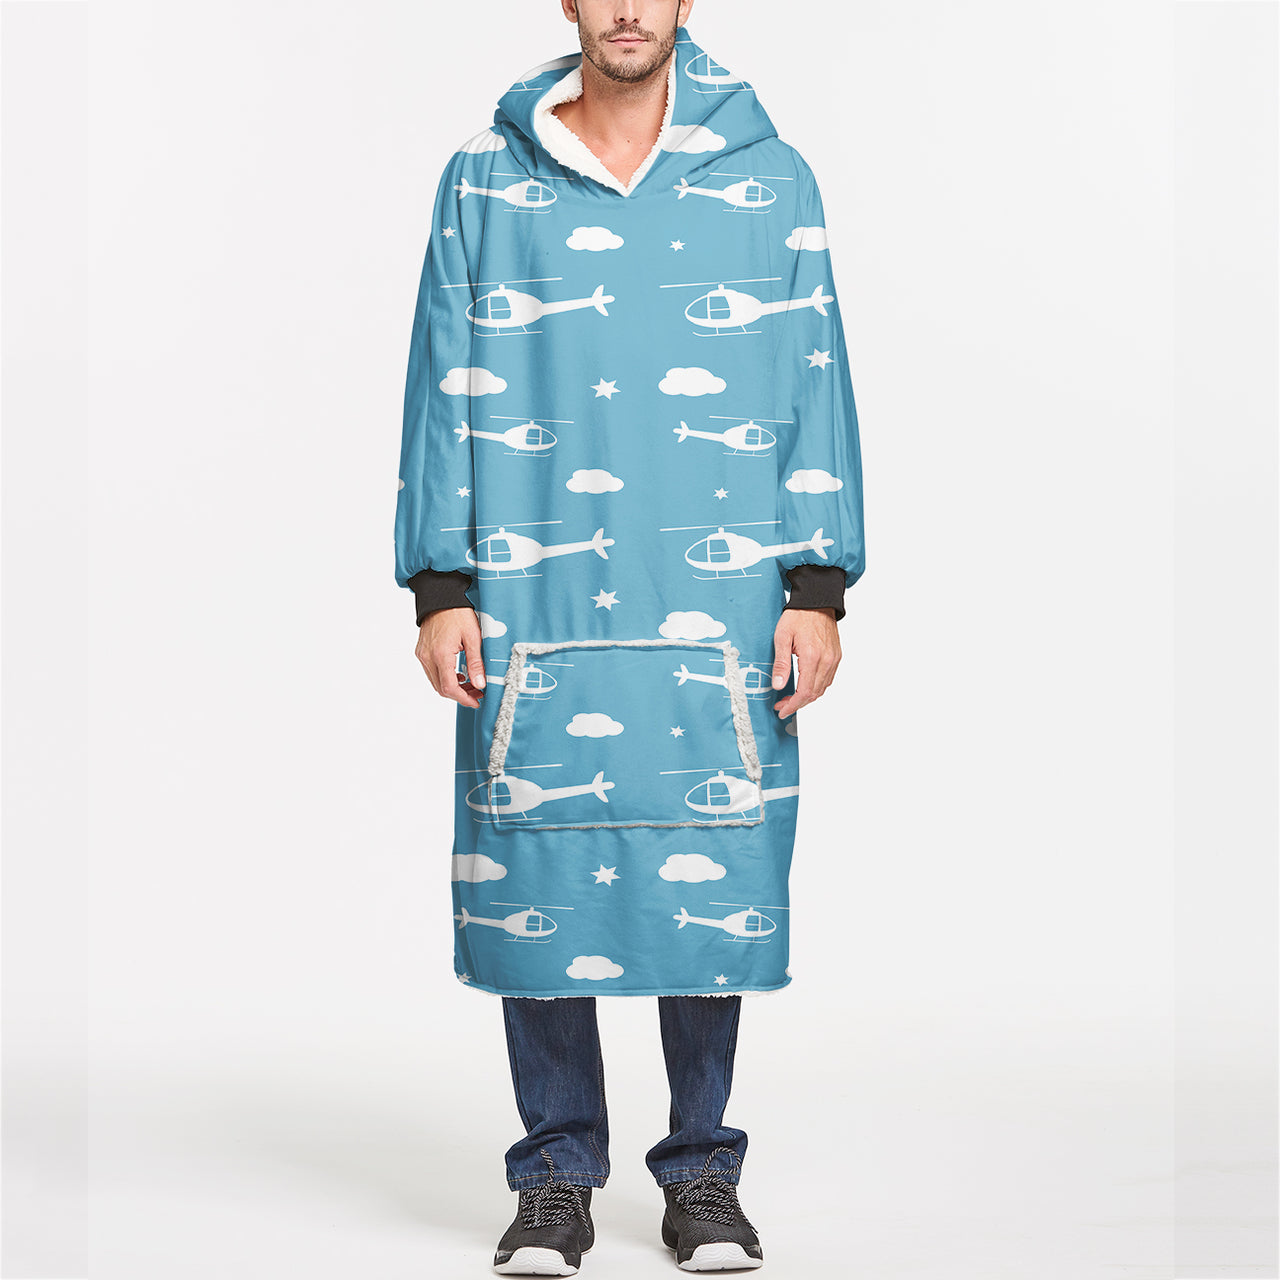 Helicopters & Clouds Designed Blanket Hoodies